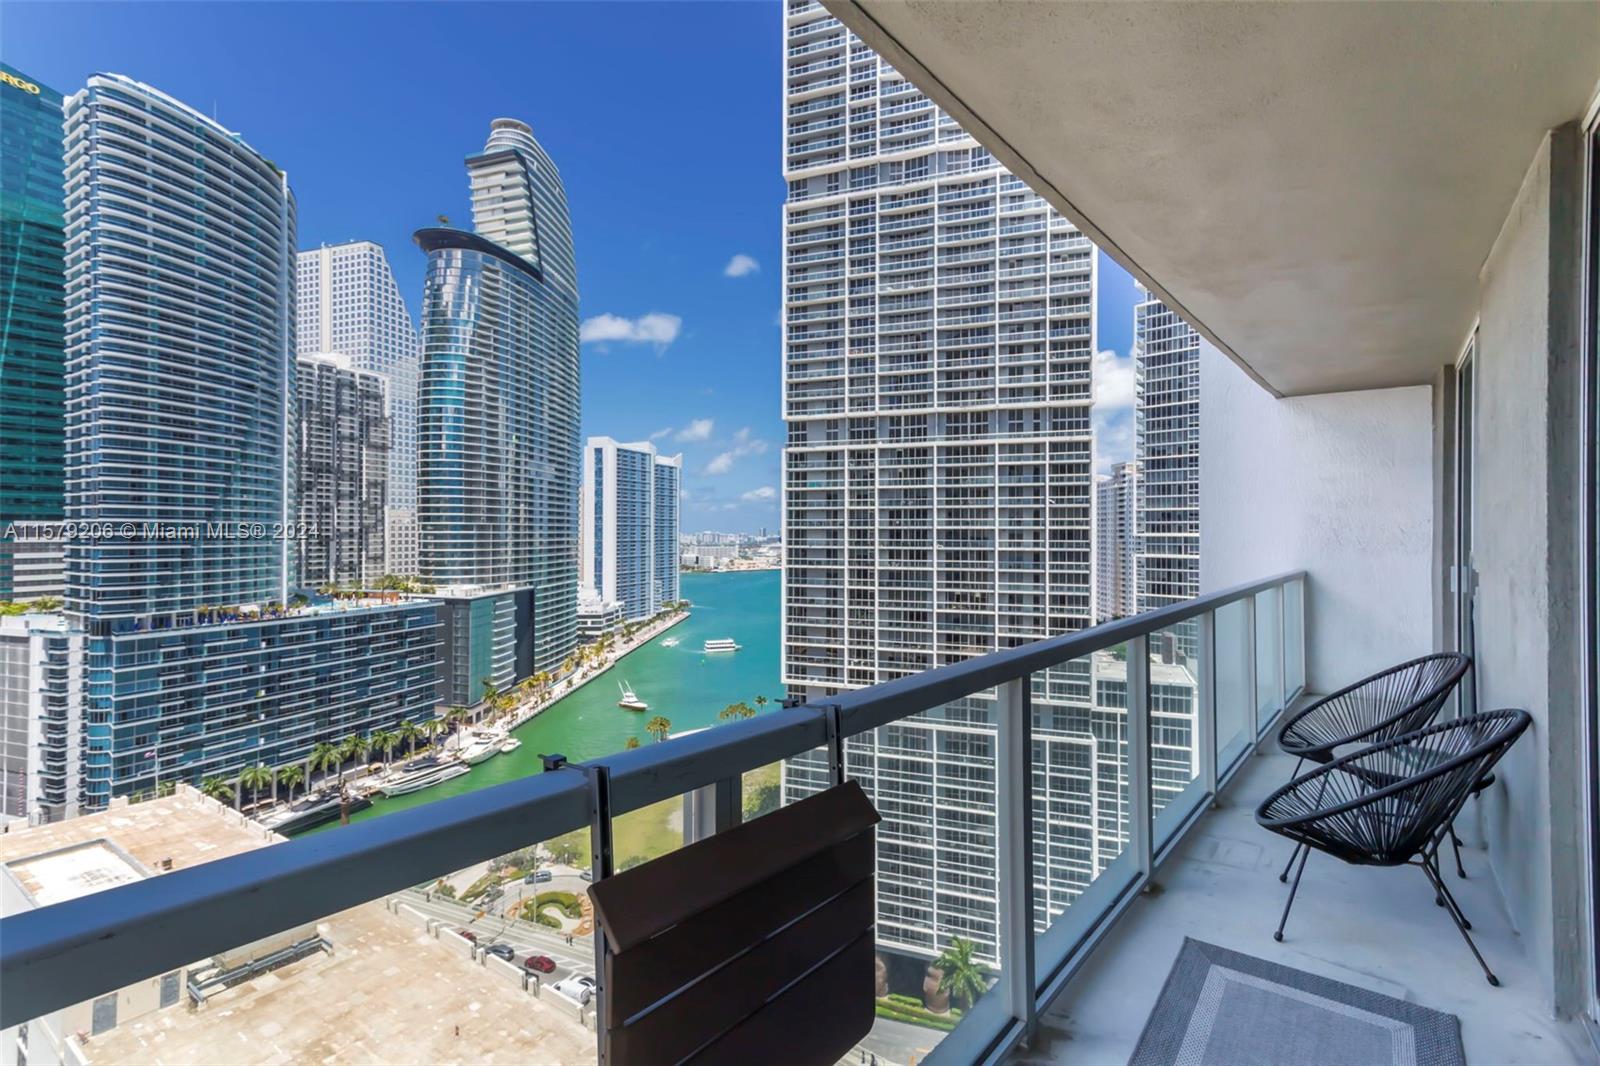 Spacious North East Corner Unit in Brickell with views of Biscayne Bay all the way to the Atlantic Ocean. Walking distance to all the great restaurants in Brickell, including Sexy Fish and Zuma, and right across the street from all the shops, dining, and nightlife at the Brickell City Center. Enjoy nearly 1,200 sq. ft. of privacy in this Corner Unit with a large Corner Balcony, spanning the entire width of the unit, and extra windows along the western walls which let in lots of natural light! Open Floor Plan with Kitchen flowing into Living Room. 2 Full Bathrooms. Long corridor off Foyer leading into Living Room offers additional privacy. Amenities include a true Rooftop Pool on the 42nd floor, gym, spa, media room, community room, and more!